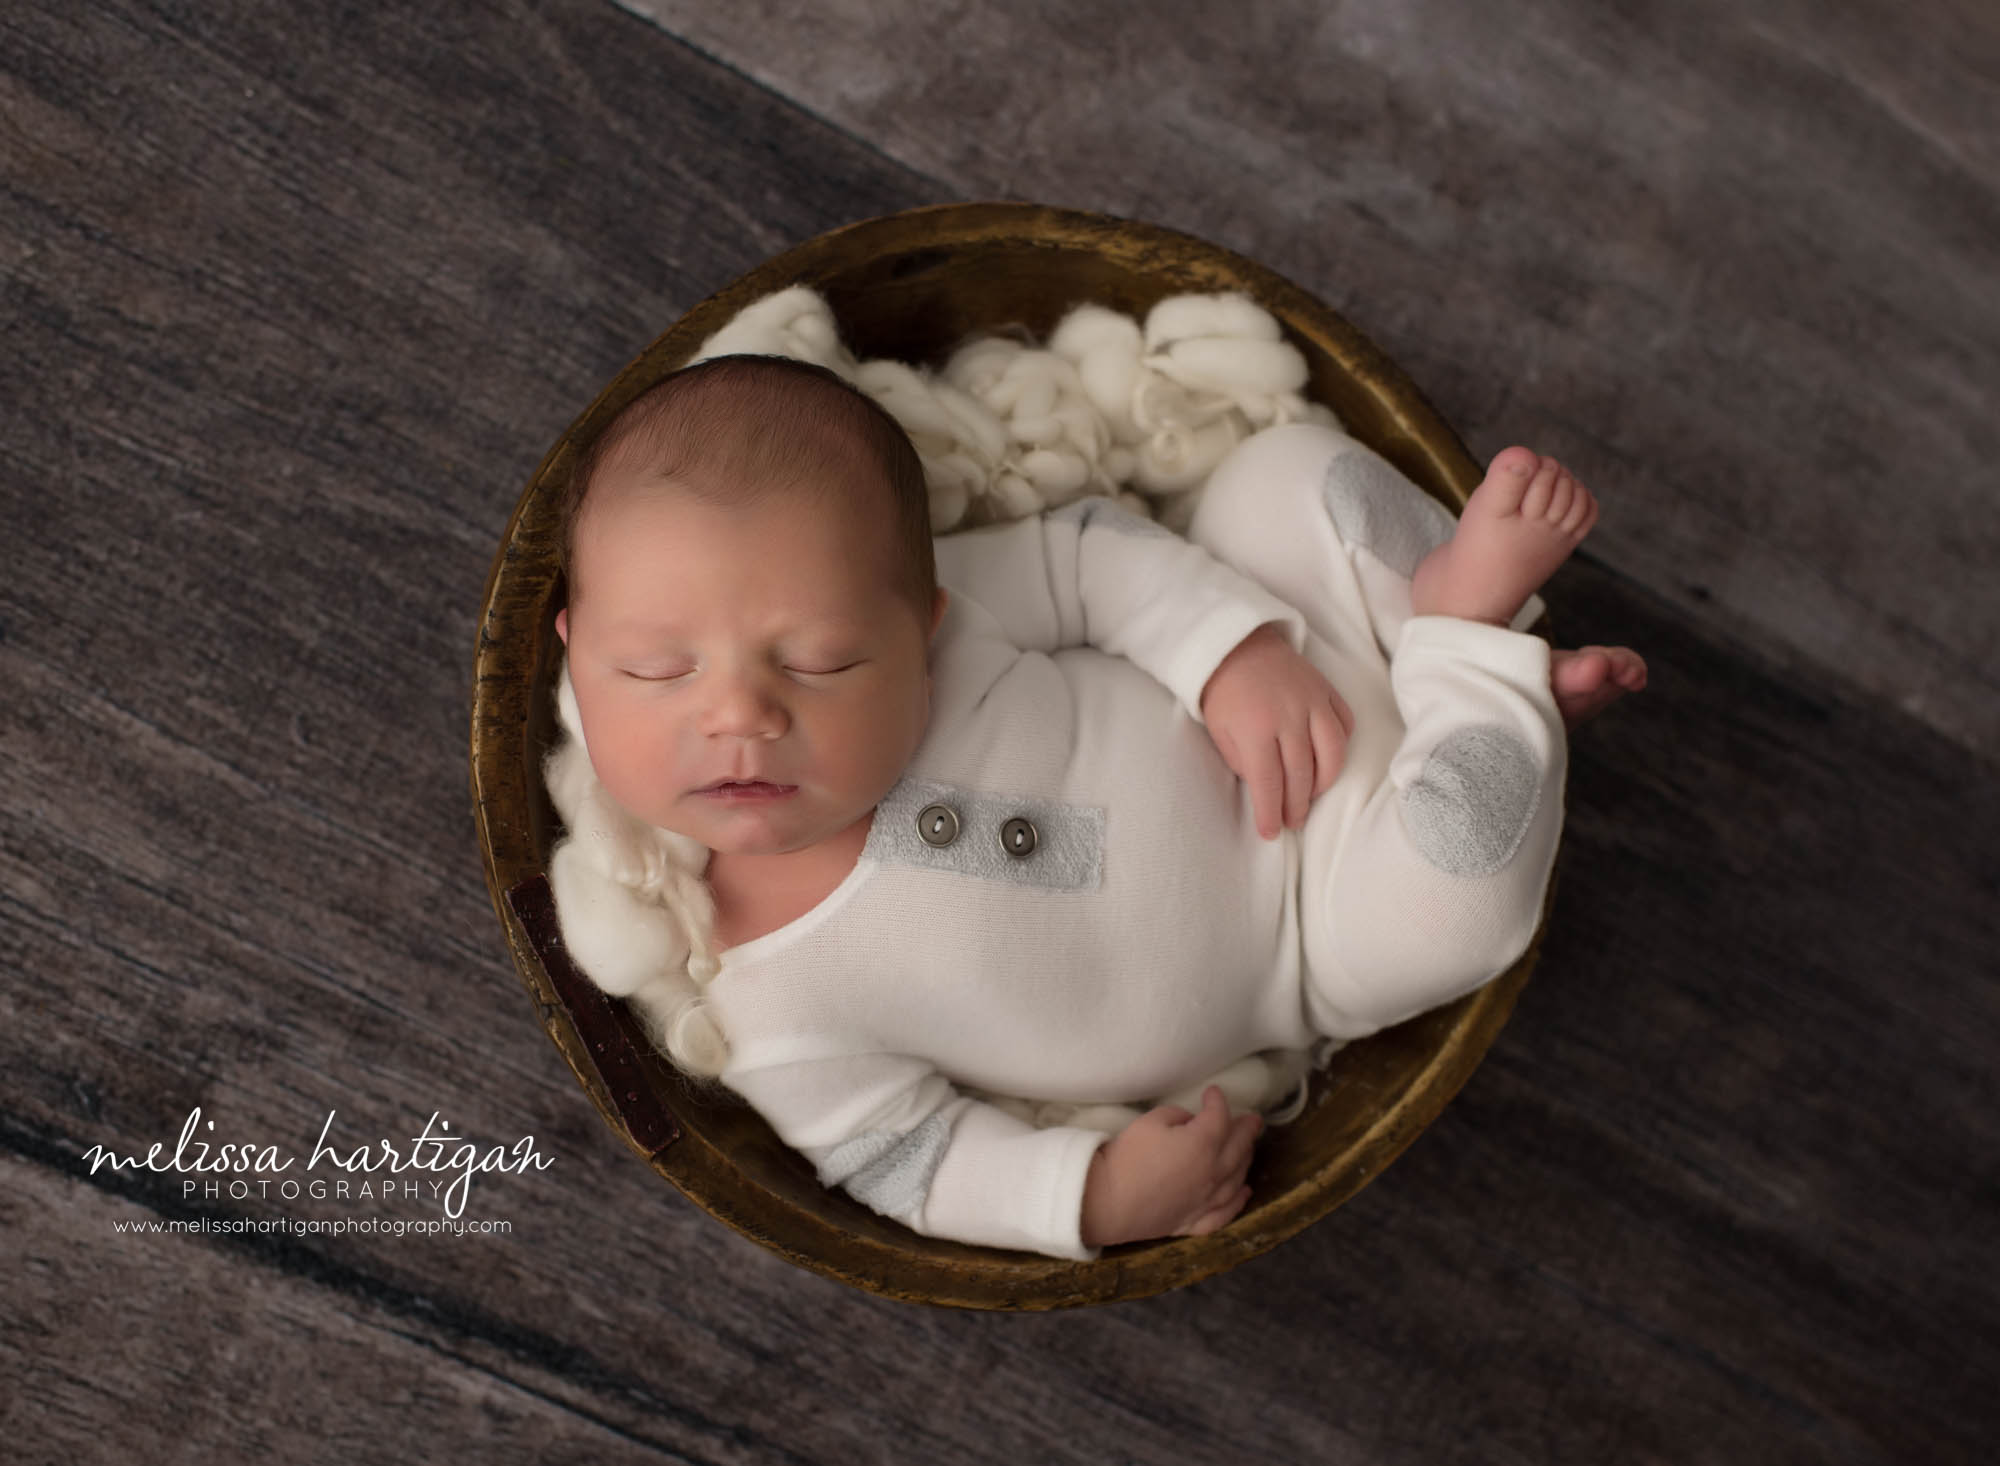 newborn baby boy wearing white newborn outfit posed in wooden bowl